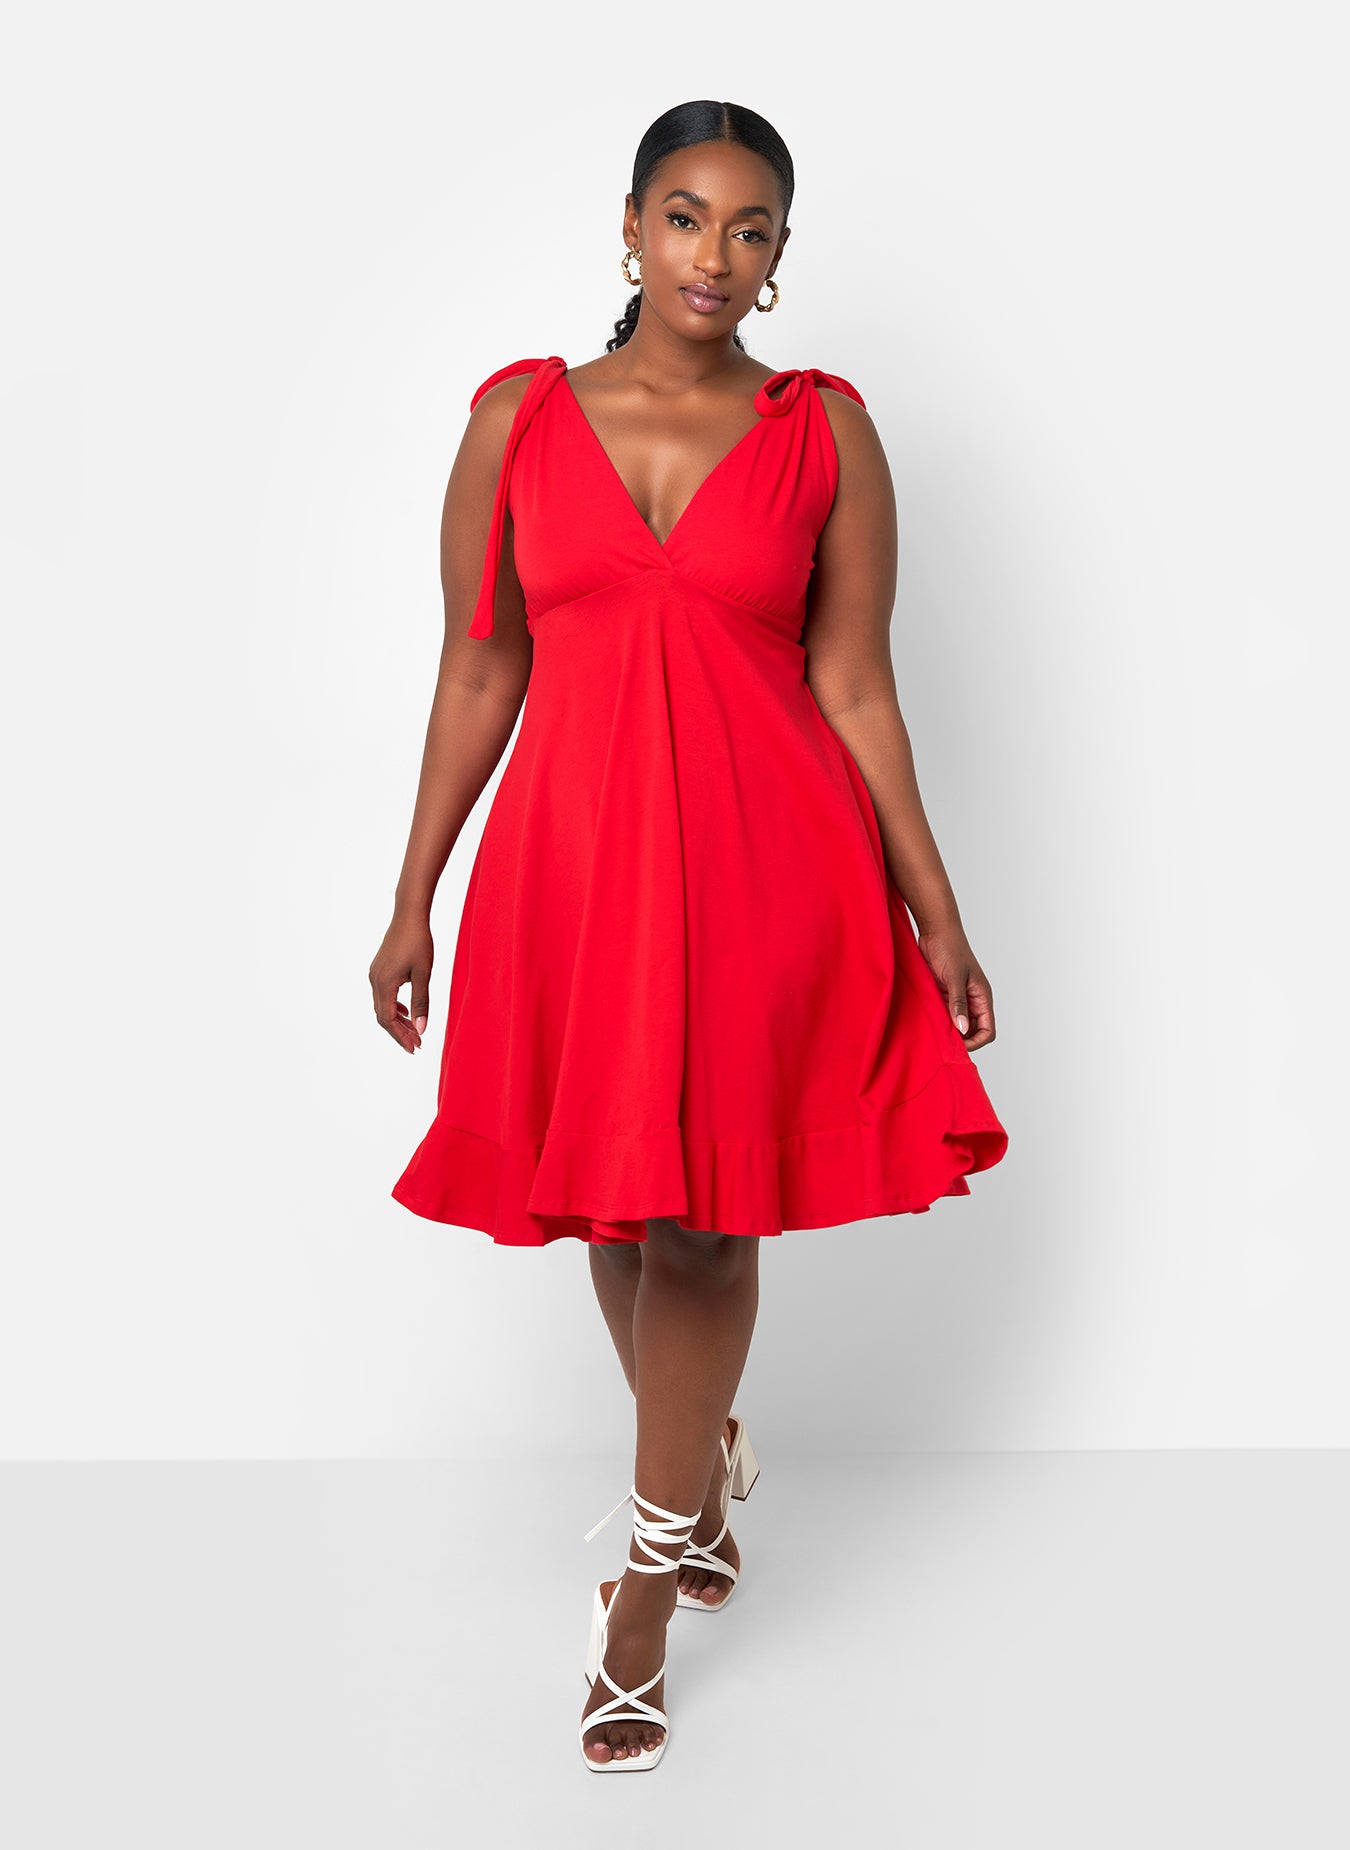 Torrid Jersey Lace Up Skater Dress Red Plus Size 2 2X 18 20 #C56882